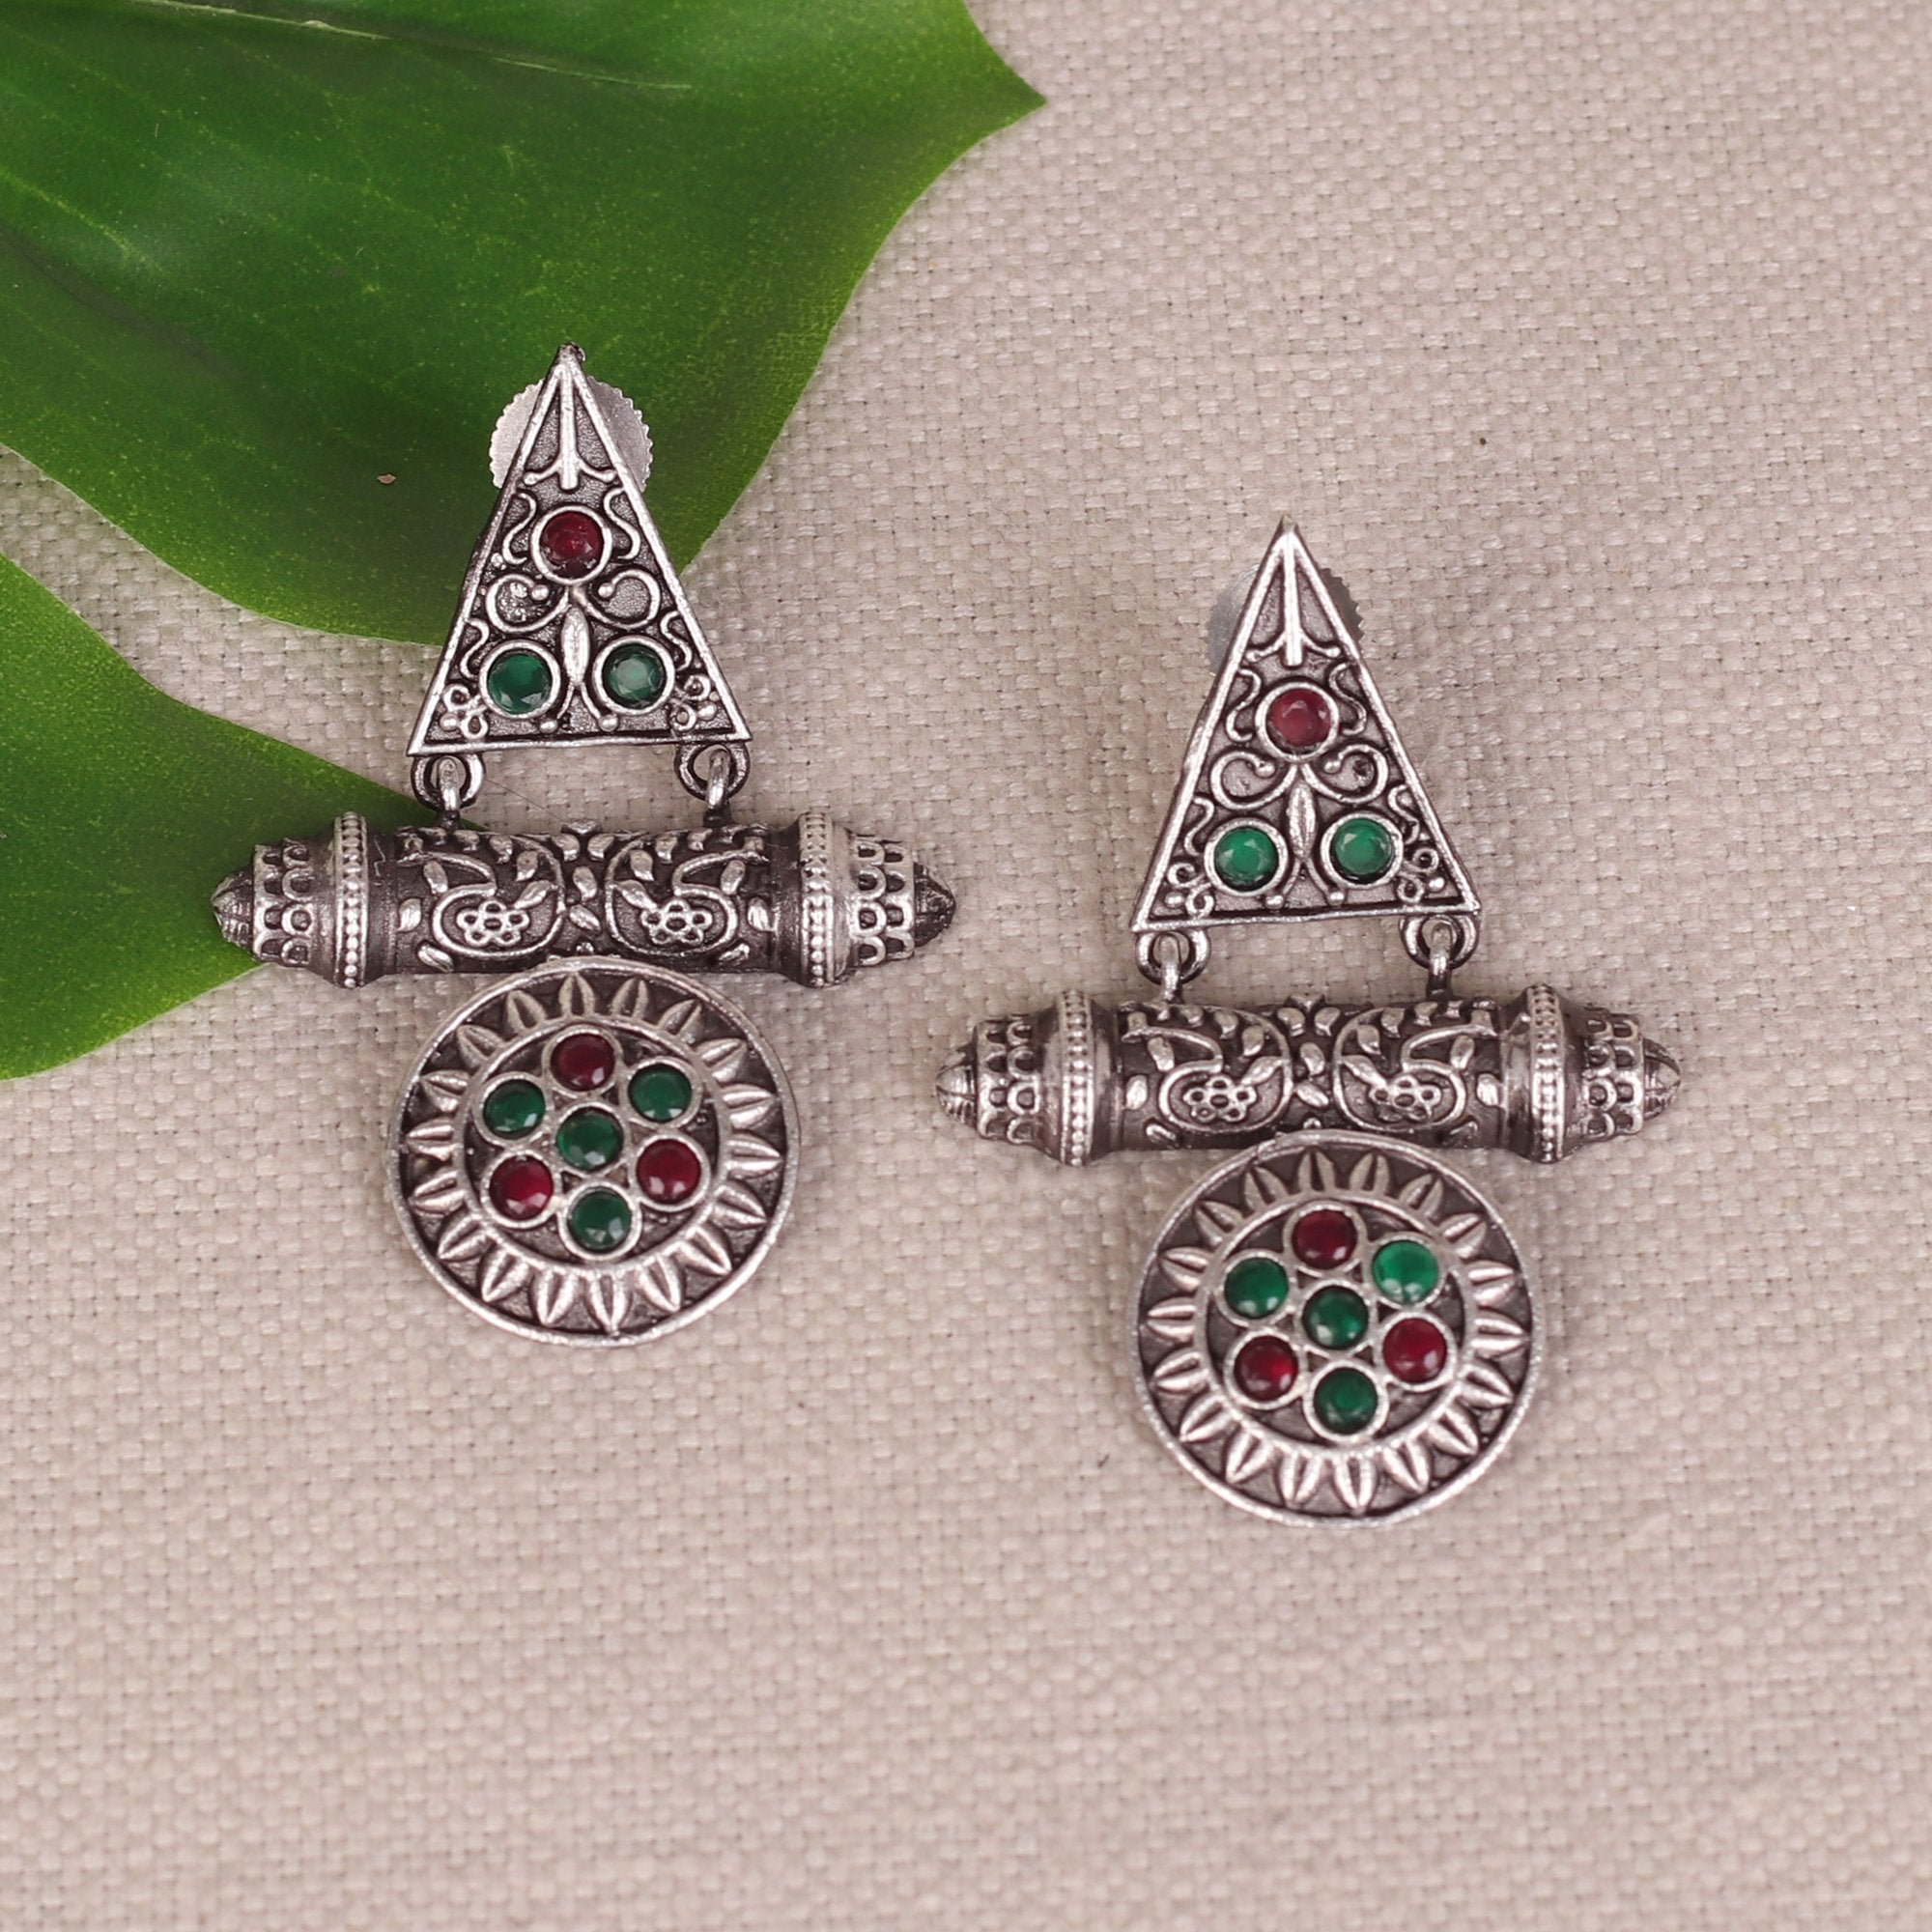 German Silver Earings With Ethnic Motifs